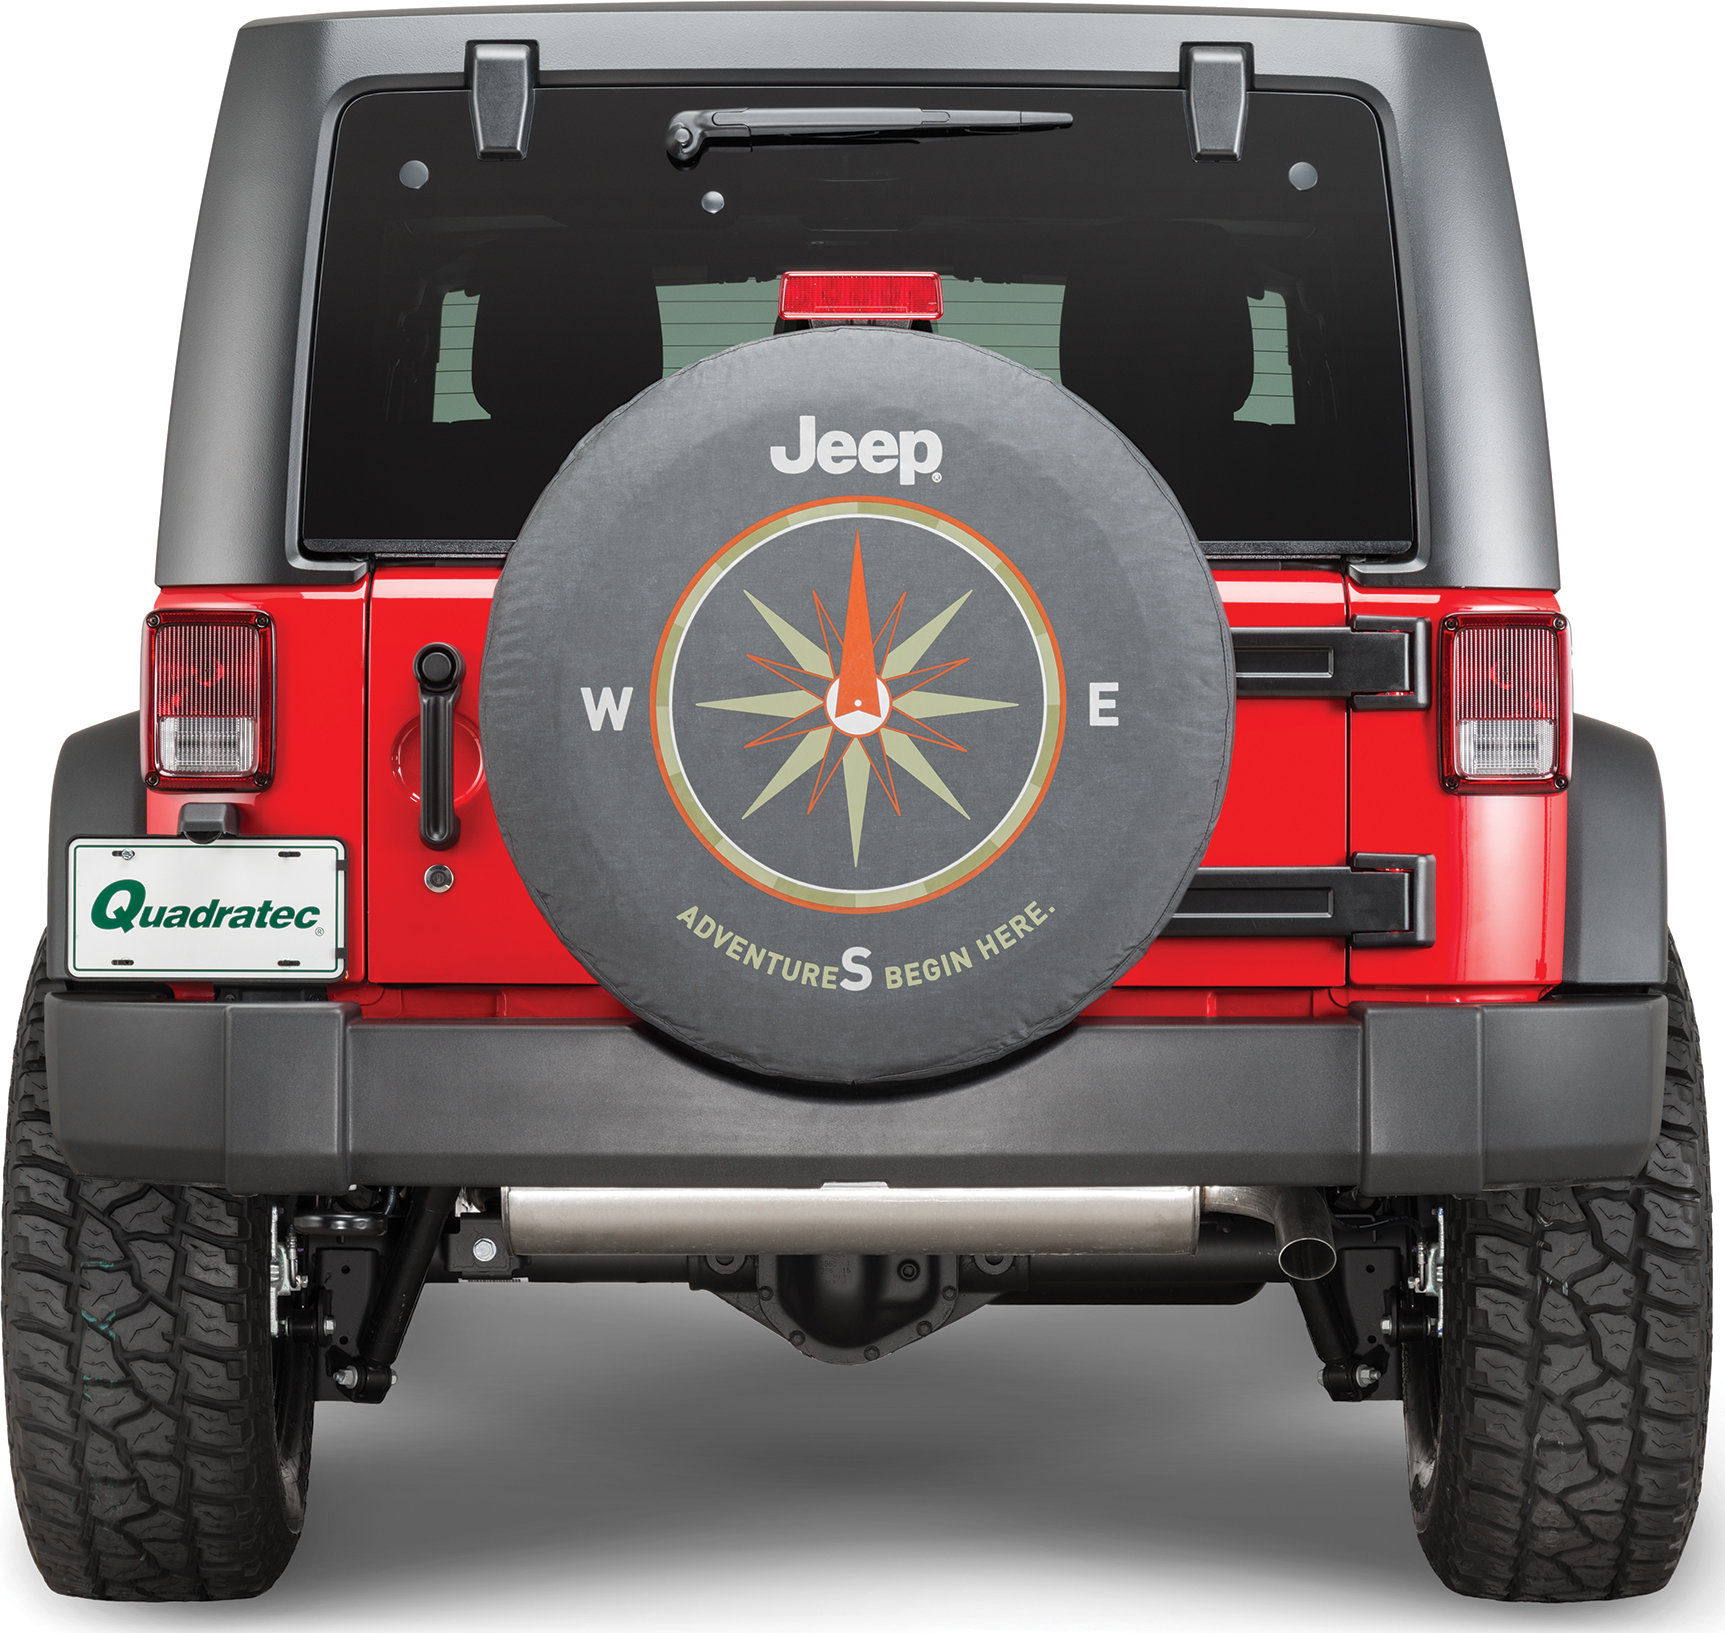 16" PIRATE MECHANICAL SKULL SPARE WHEEL TIRE COVER For Jeep Liberty Wrangler L